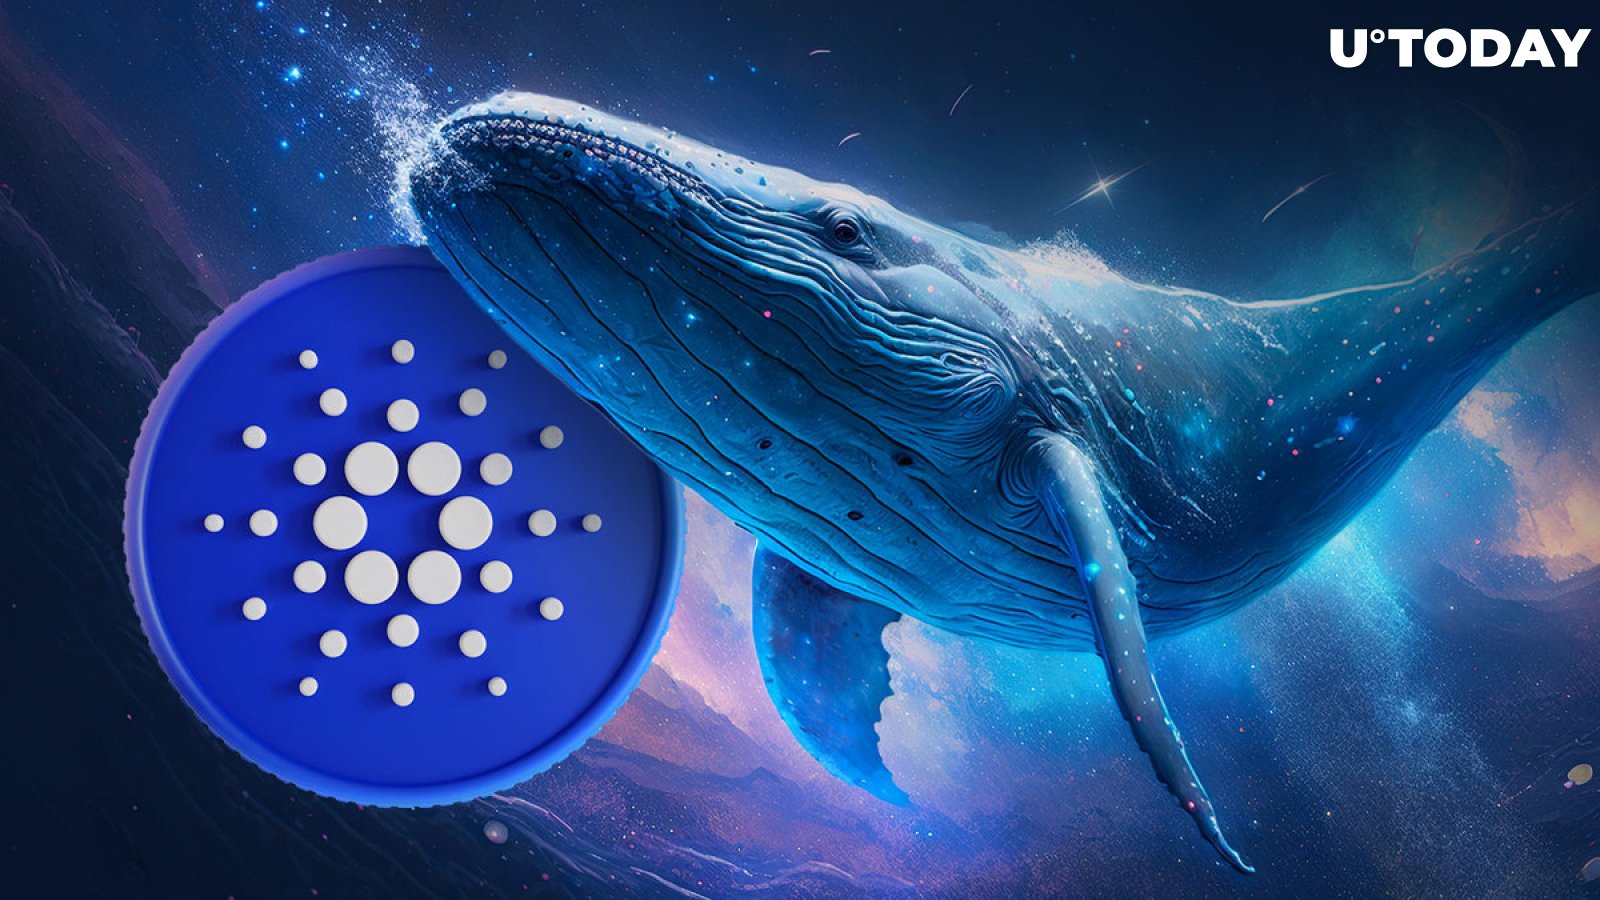 Cardano (ADA) Sees Massive Wave of Interest From Whales, Where It Might Lead